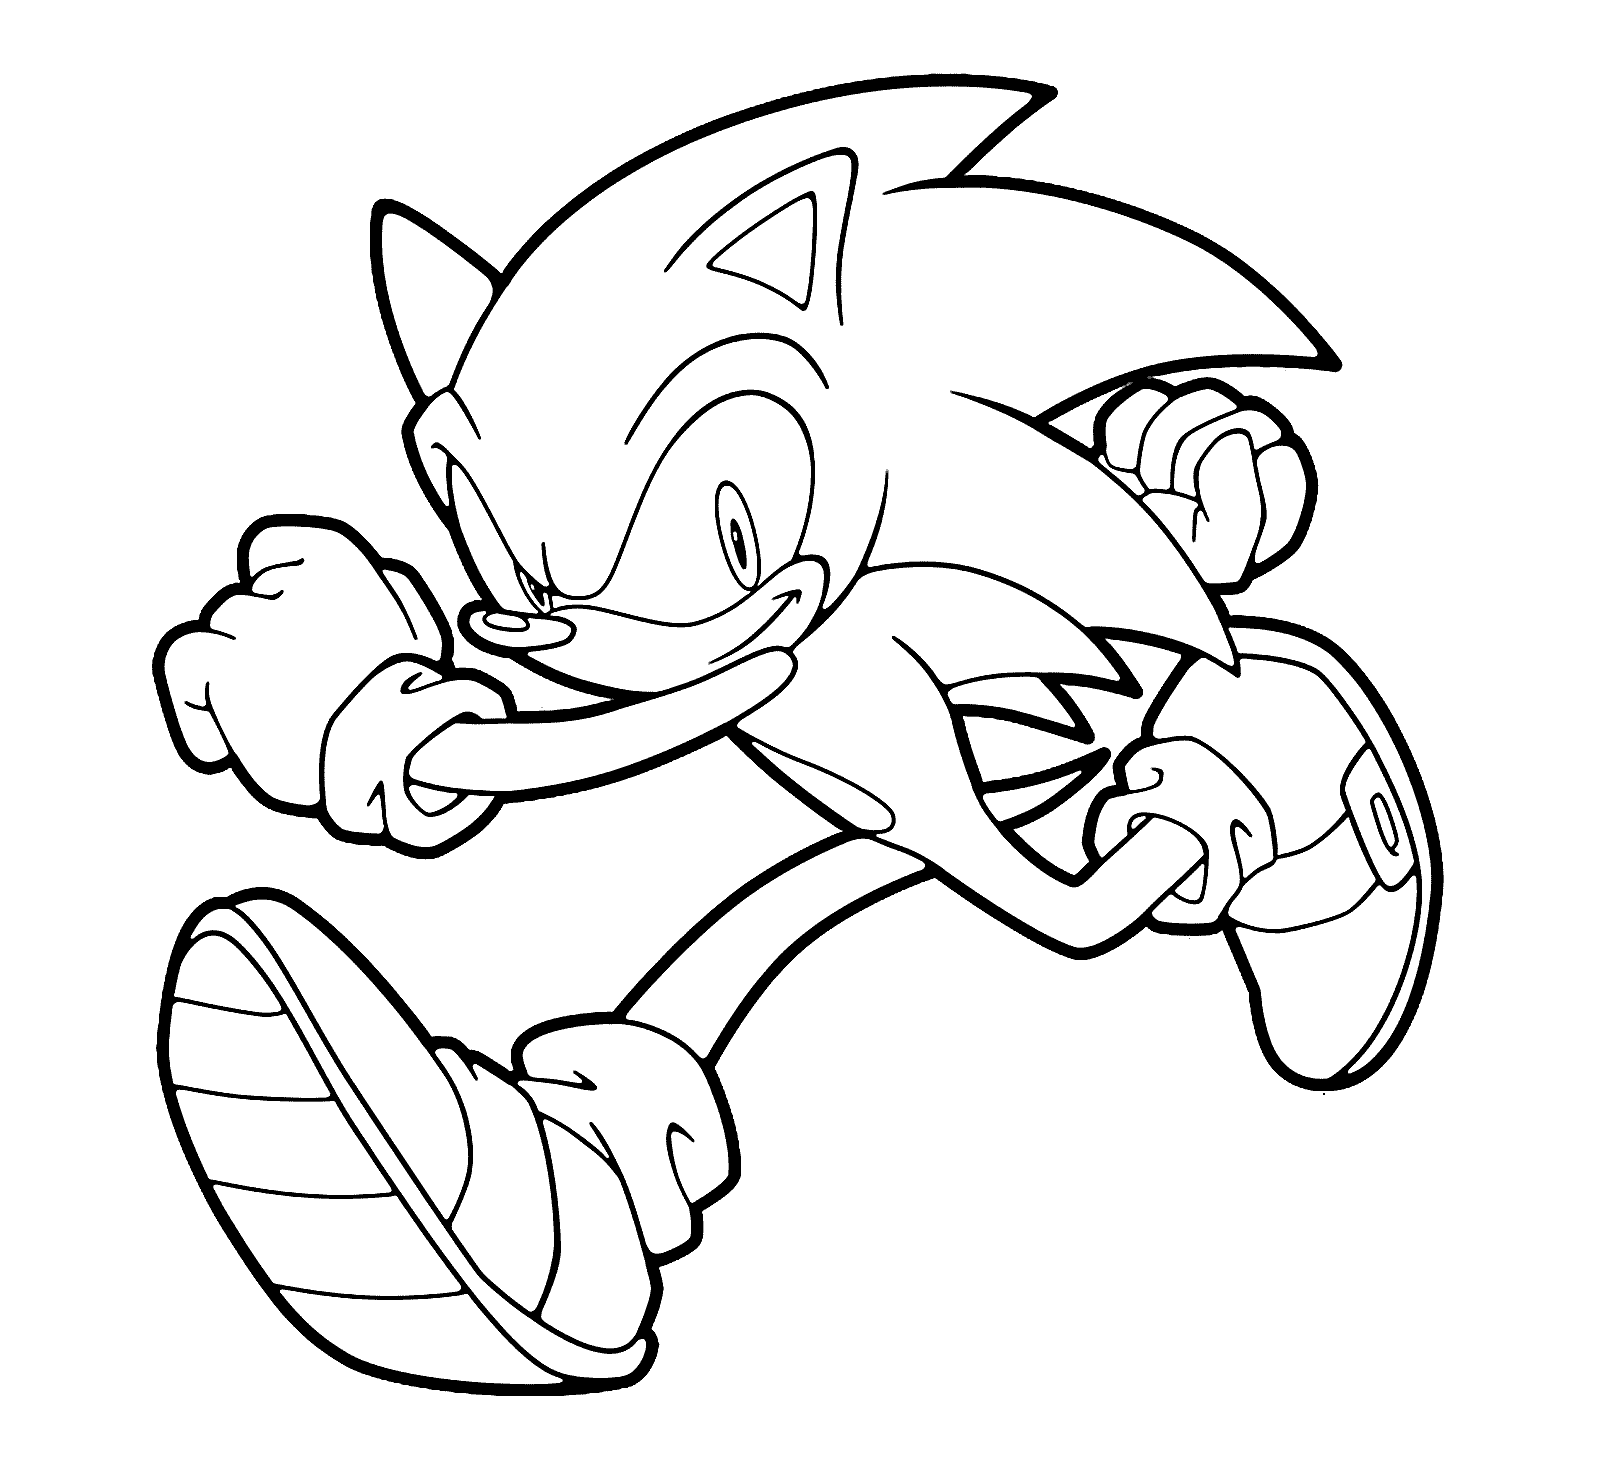 Sonic Coloring Pages Online For Free - Coloring Home